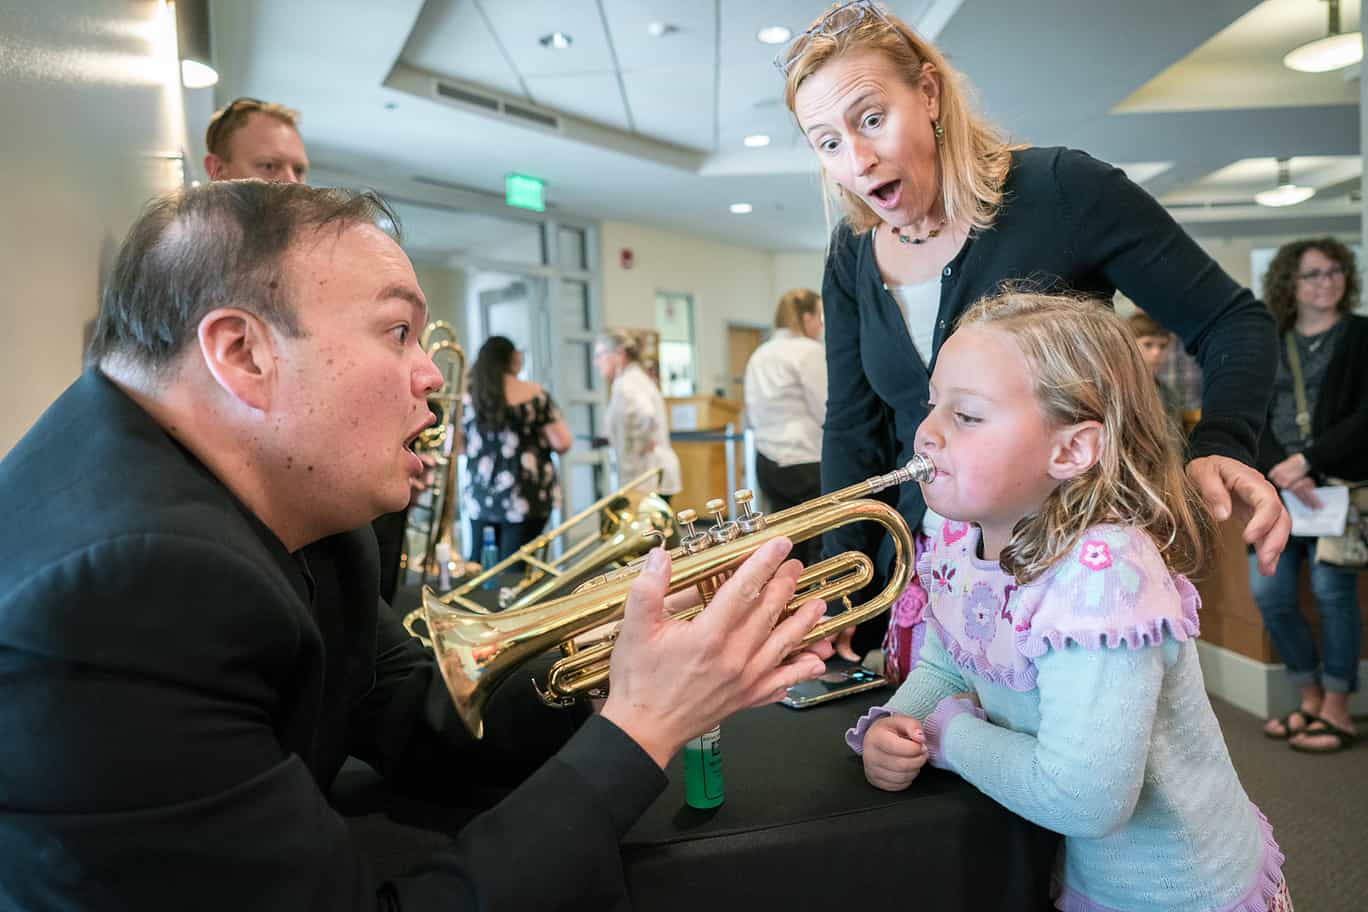 A girl blows into a trumpet held by a teacher, and a woman looks surprised behind her